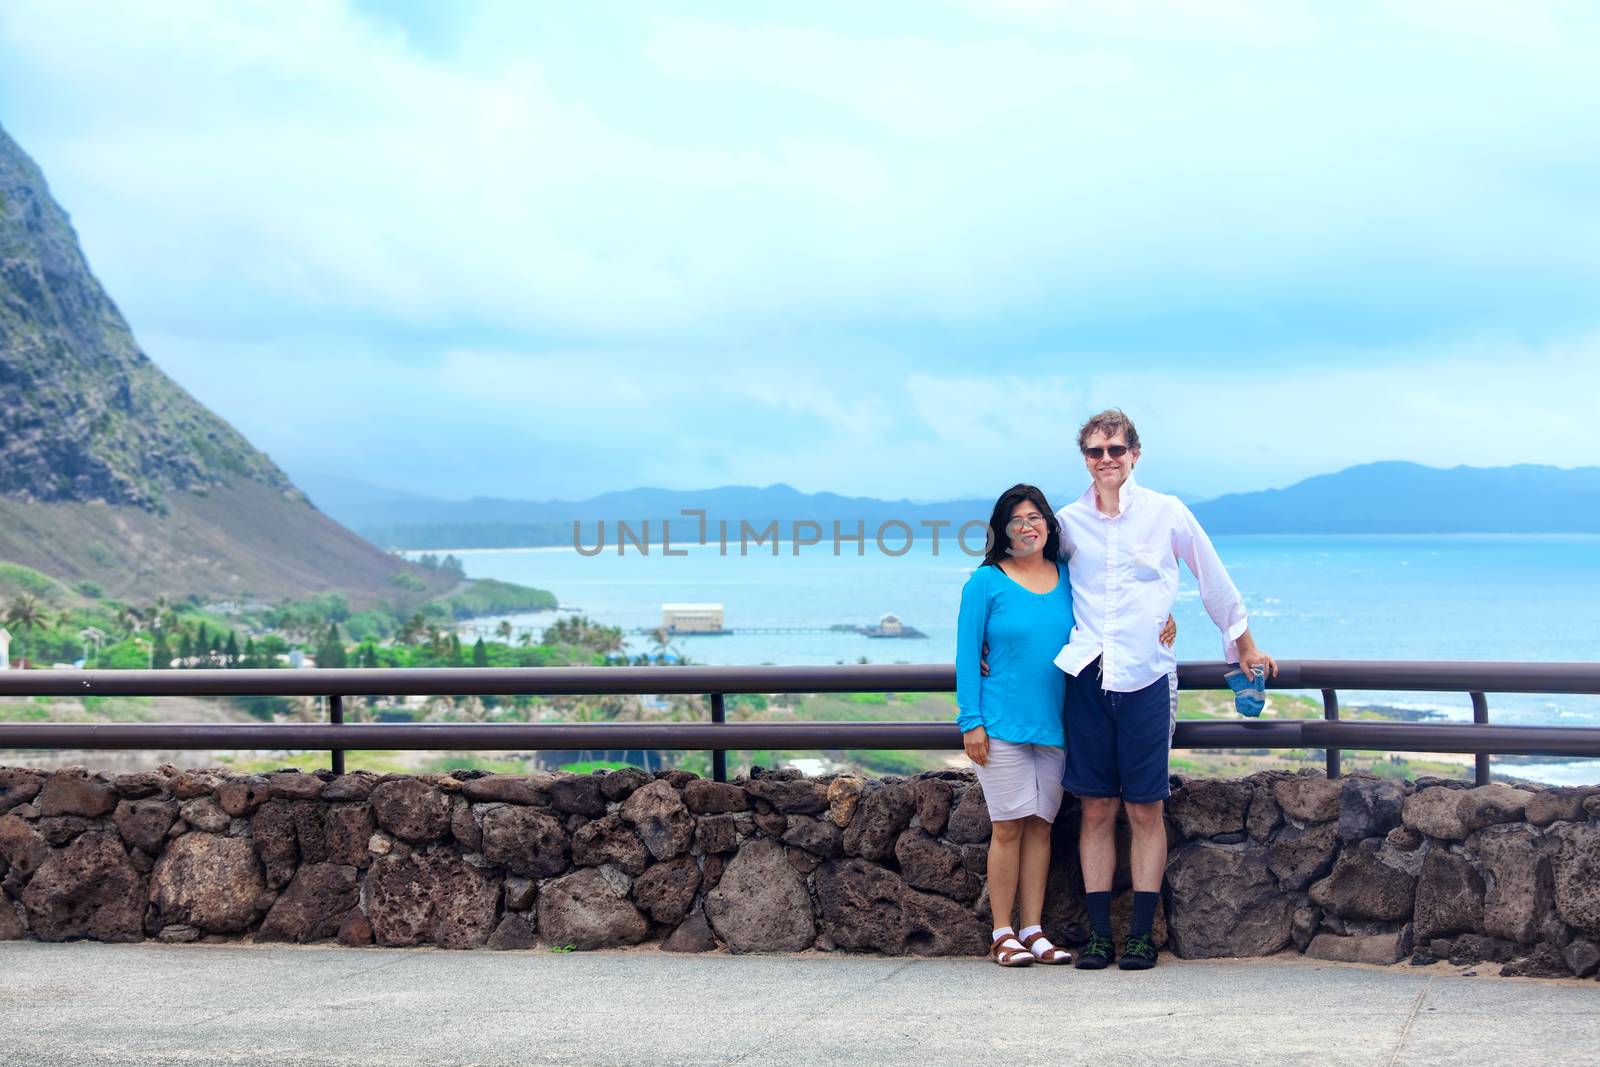 Interracial couple in forties standing by railing in Hawaii, with blue ocean scene in background